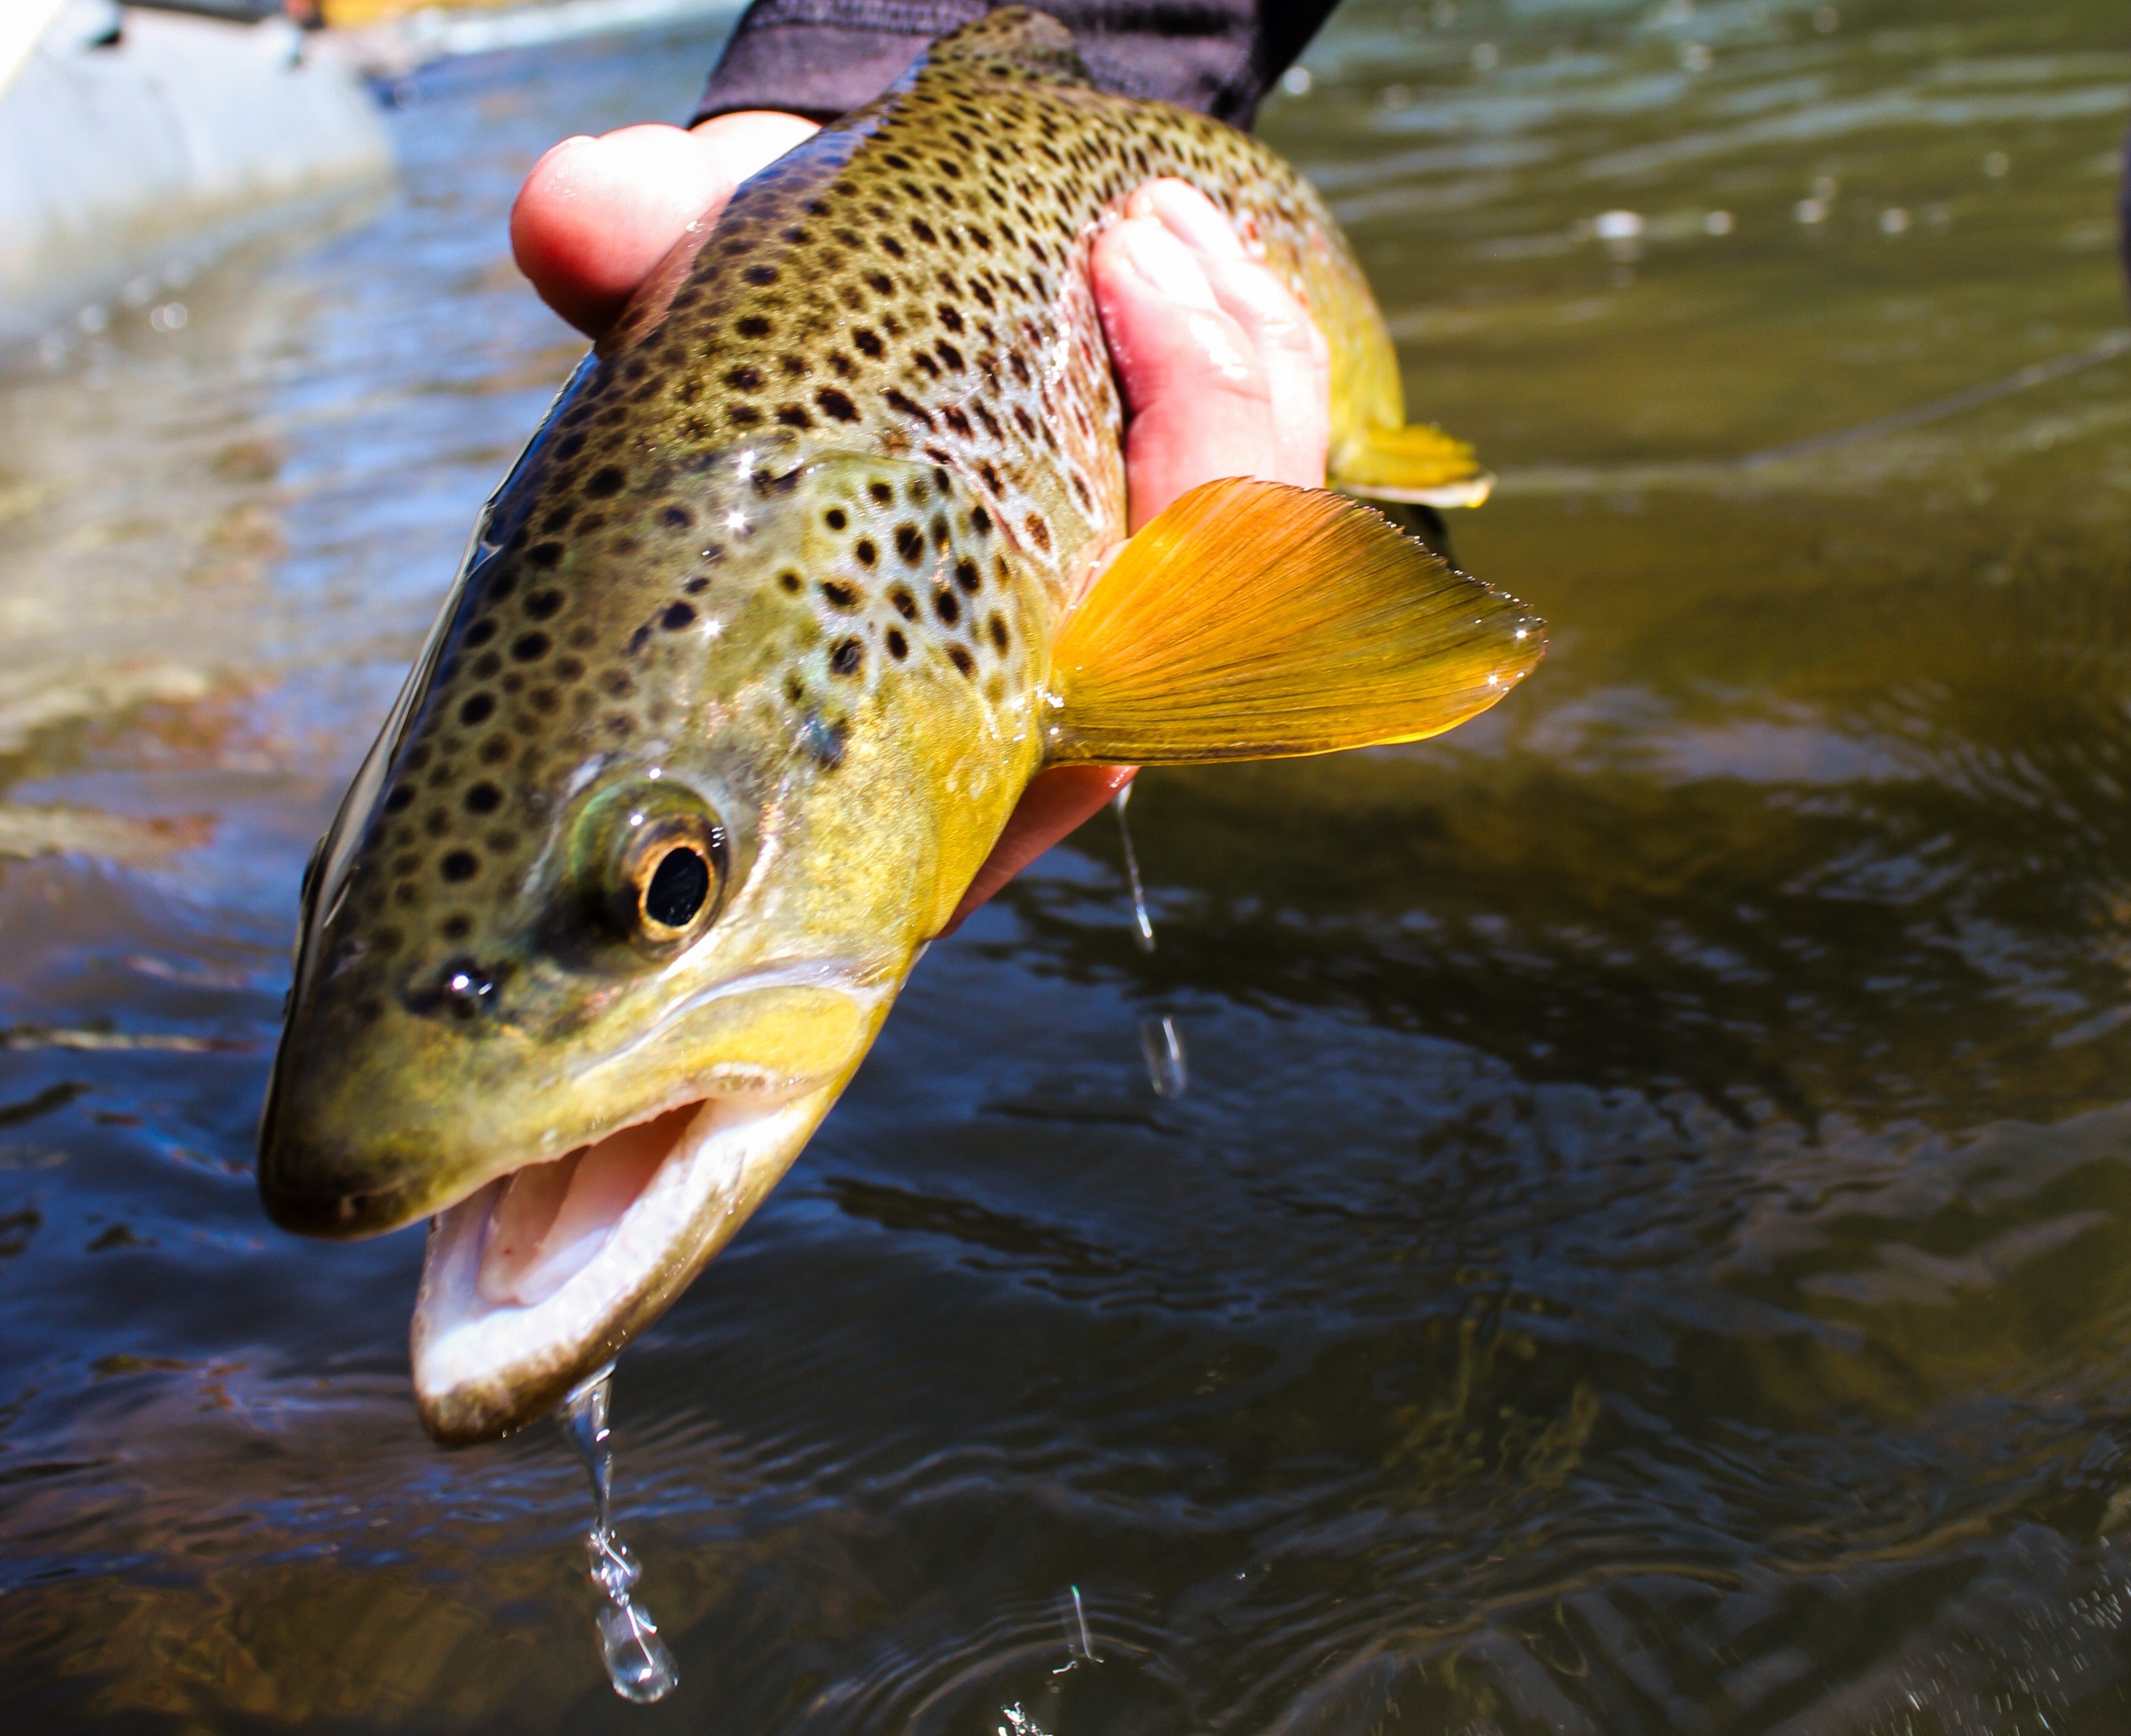 Fly Fishing for Brown Trout in the Fall Photo Essay